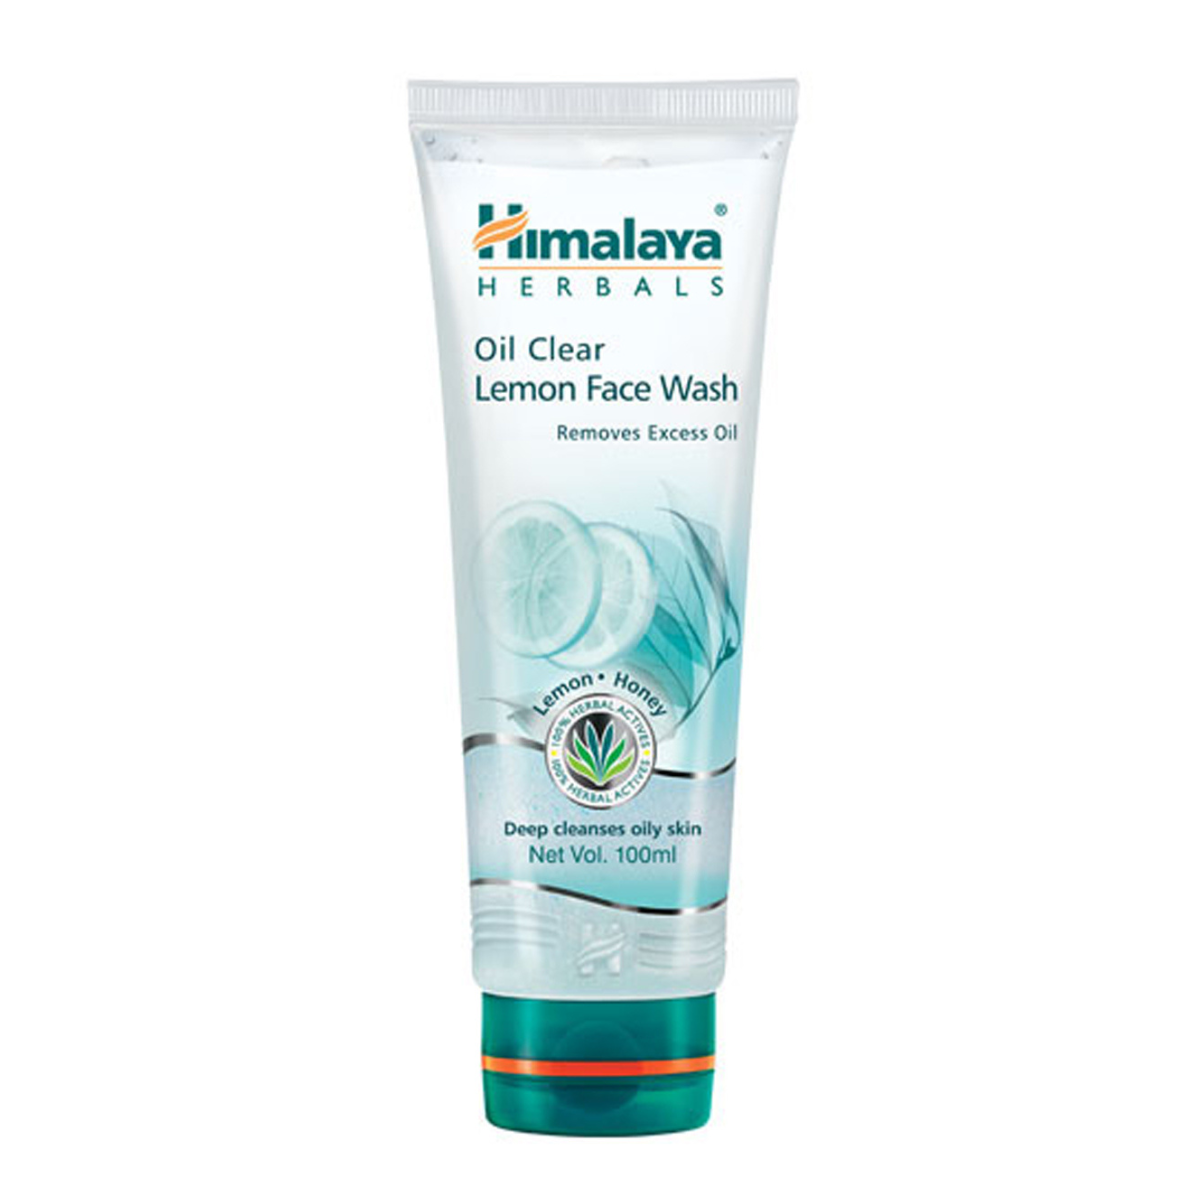 Himalaya Oil Clear Lemon Face Wash - Removes Excess Oil - Deep Cleanses Oily Skin - 100ml